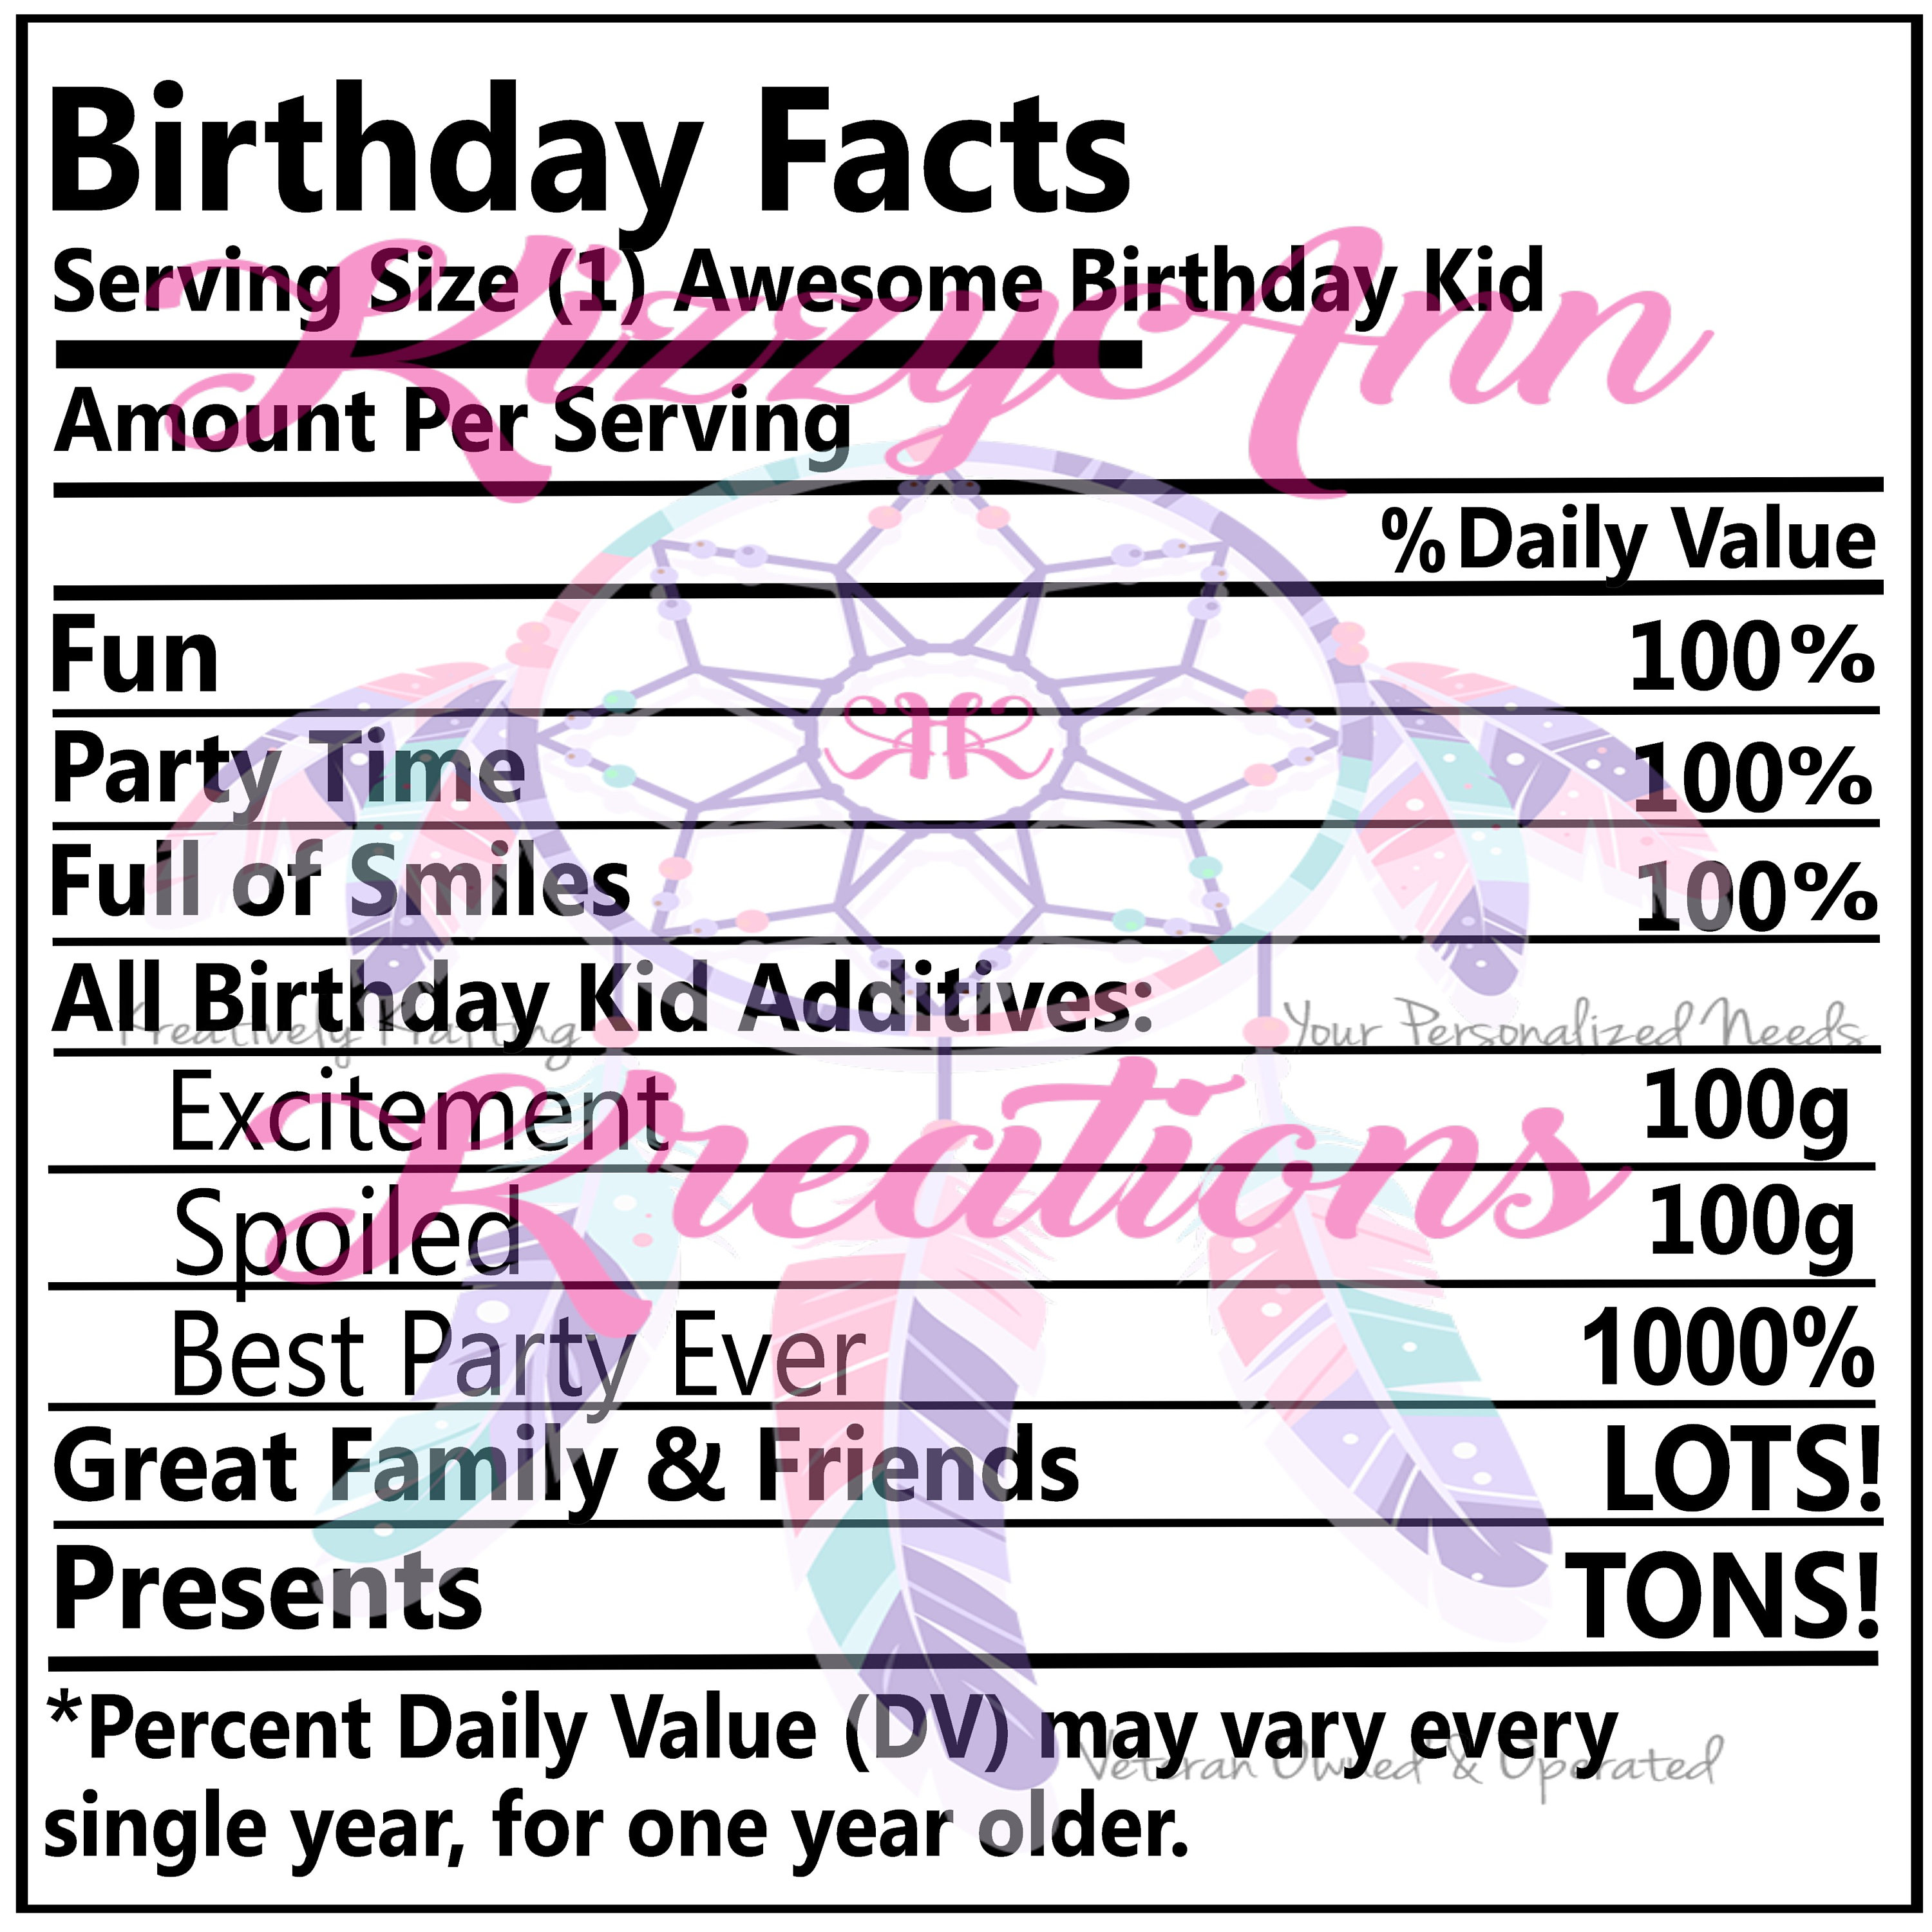 Download Kid Facts Nutritional Facts Svg Cut File Birthday Cricut